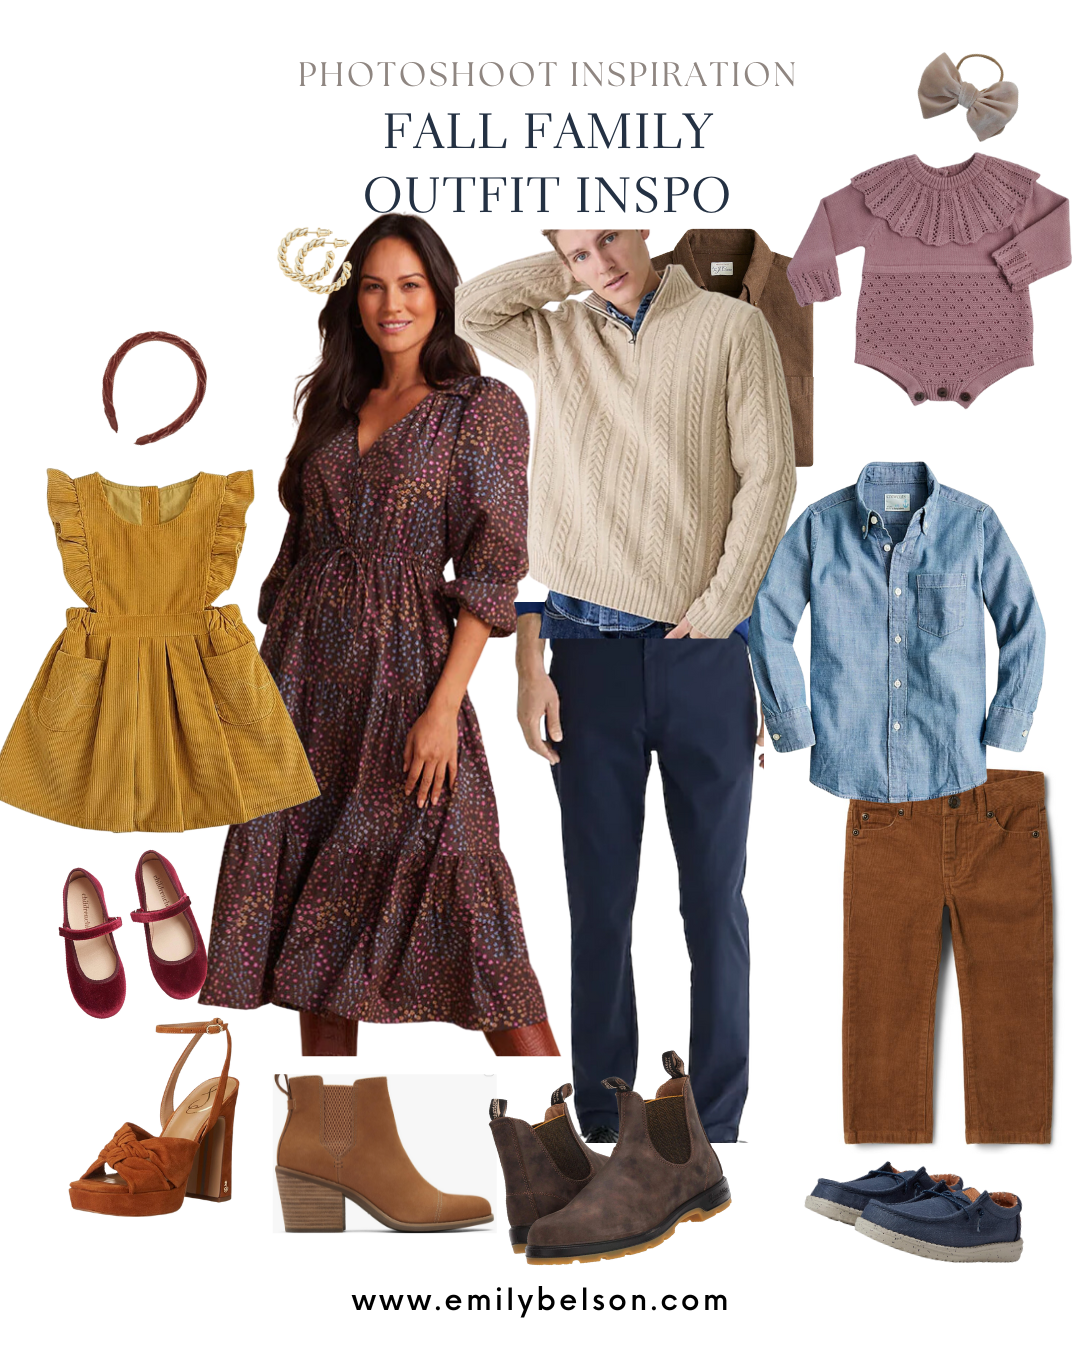 5 Easy Steps to Plan Cohesive Family Photo Outfits + Summer Outfit